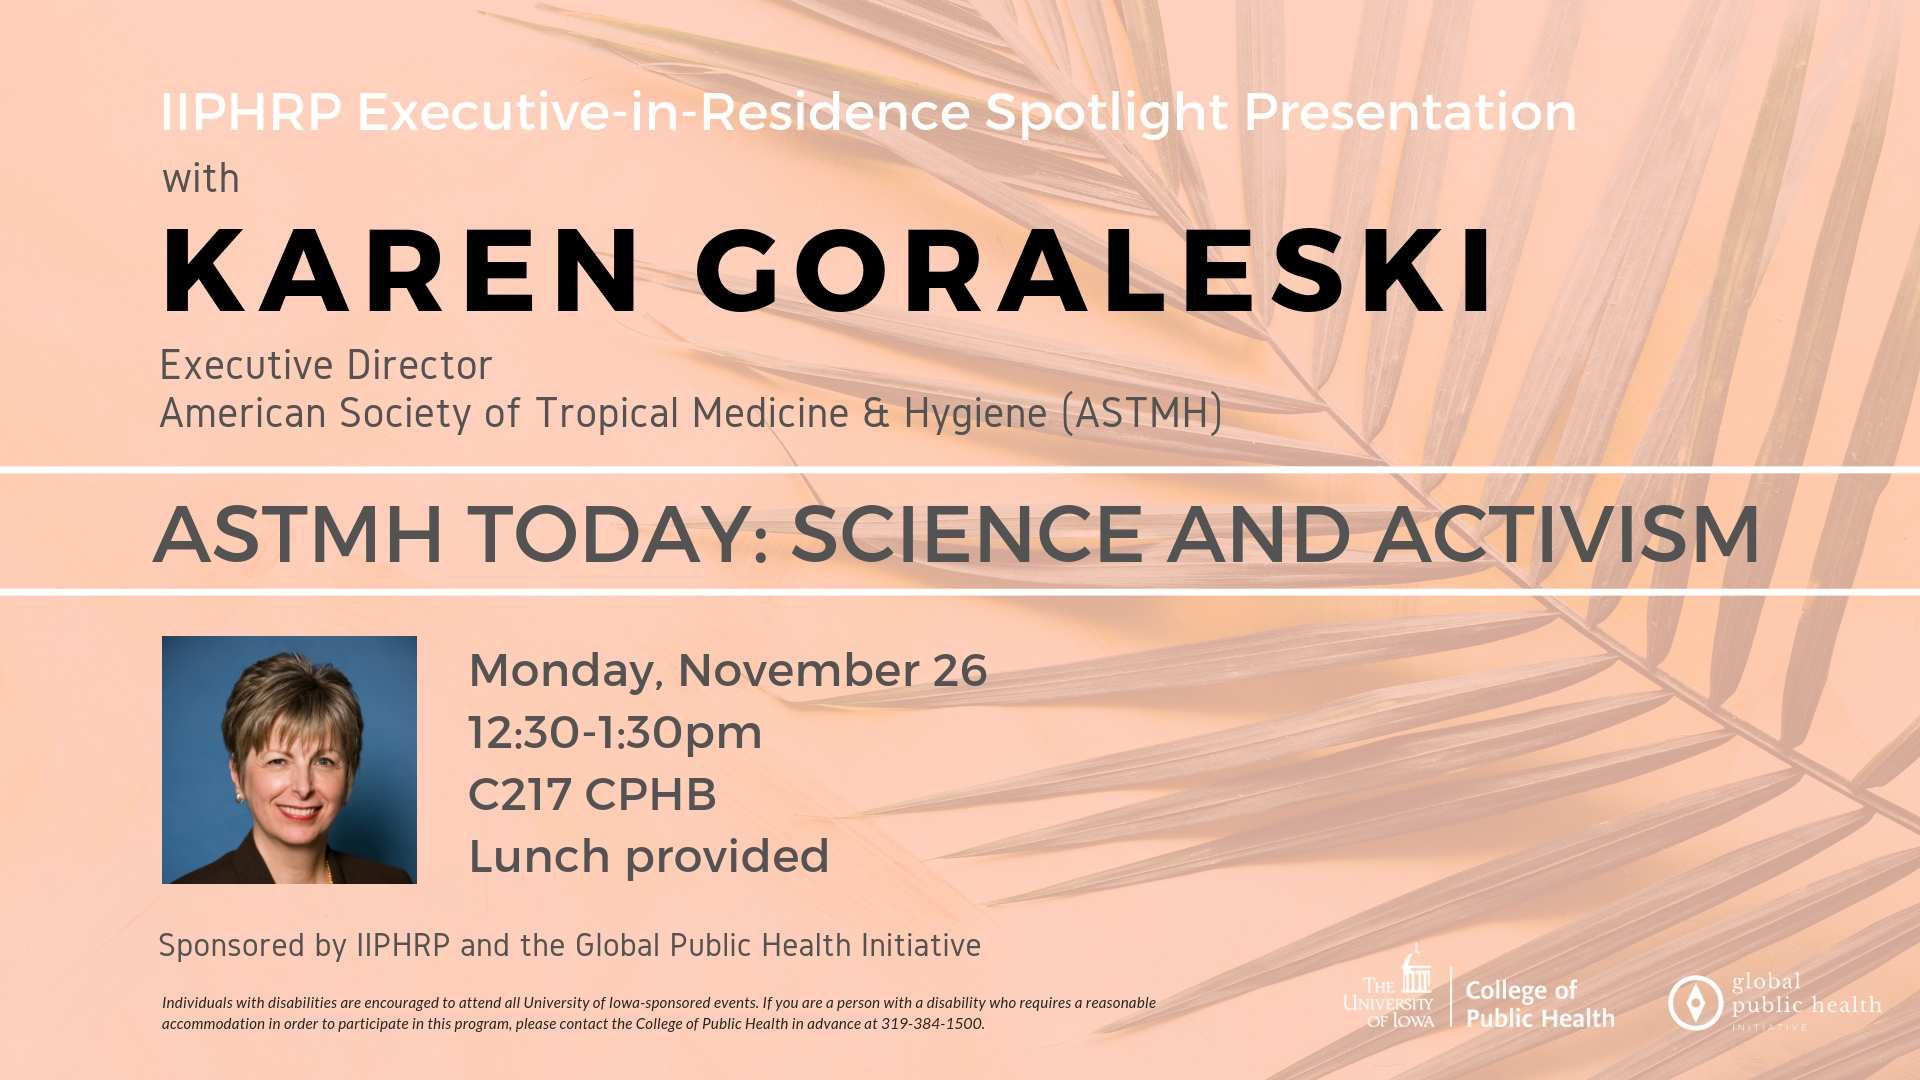 CANCELED IIPHRP Executive in Resident Spotlight: ASTMH Today: Science and Activisim with Karen Goraleski promotional image